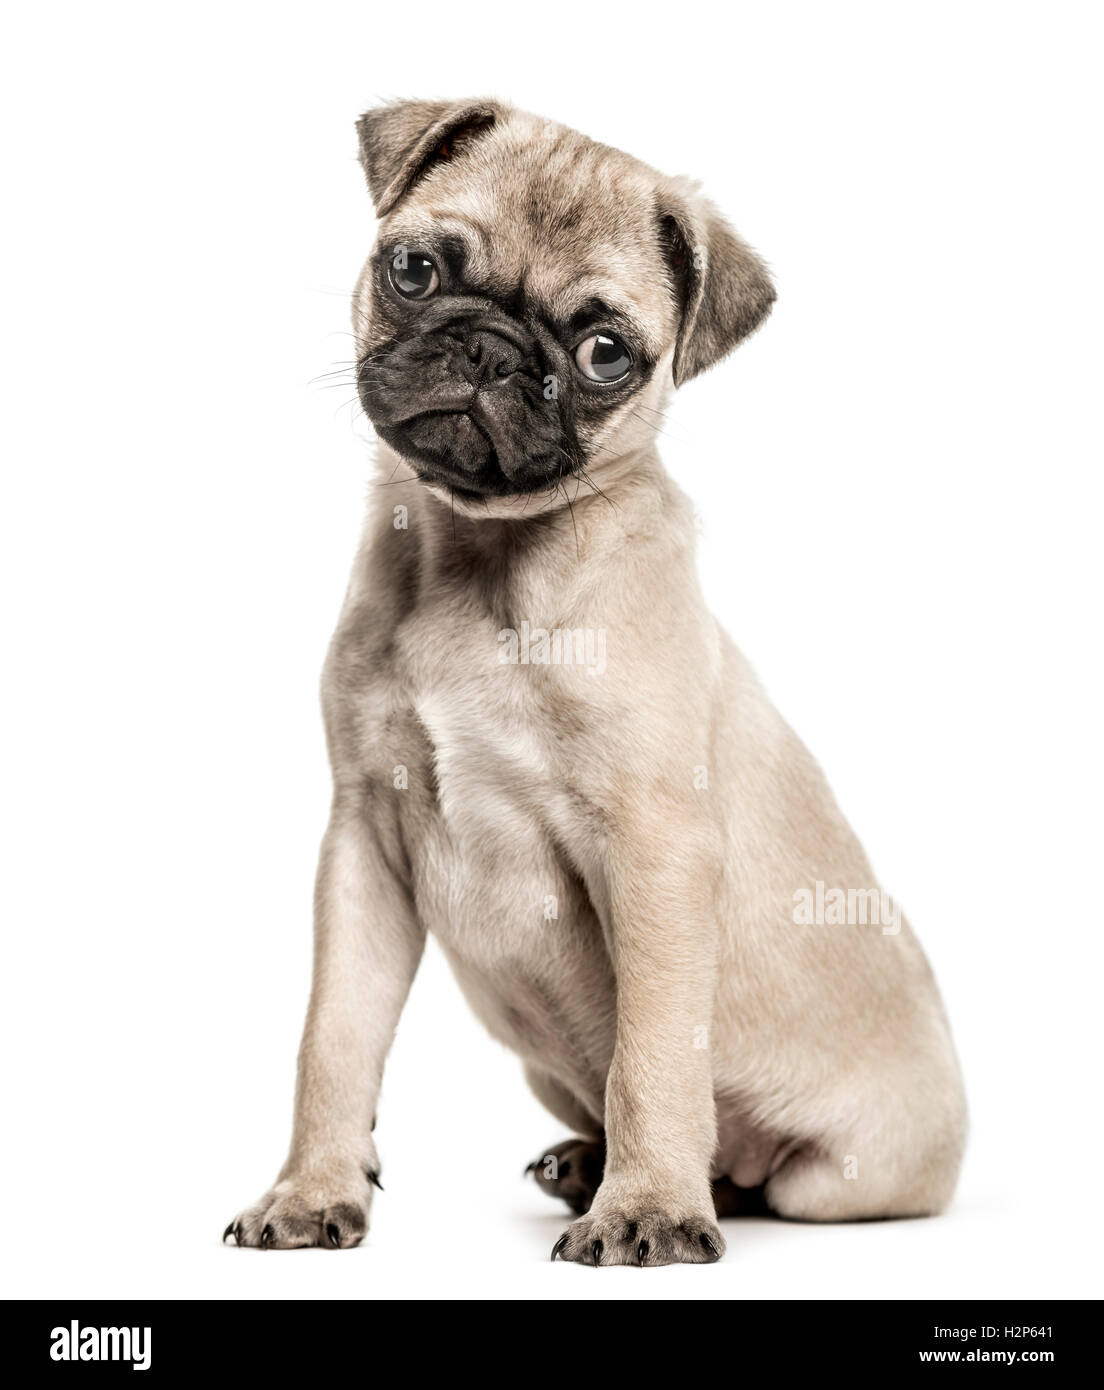 Pug puppy, 3 months old, sitting and looking at camera with tilted head, isolated on white Stock Photo